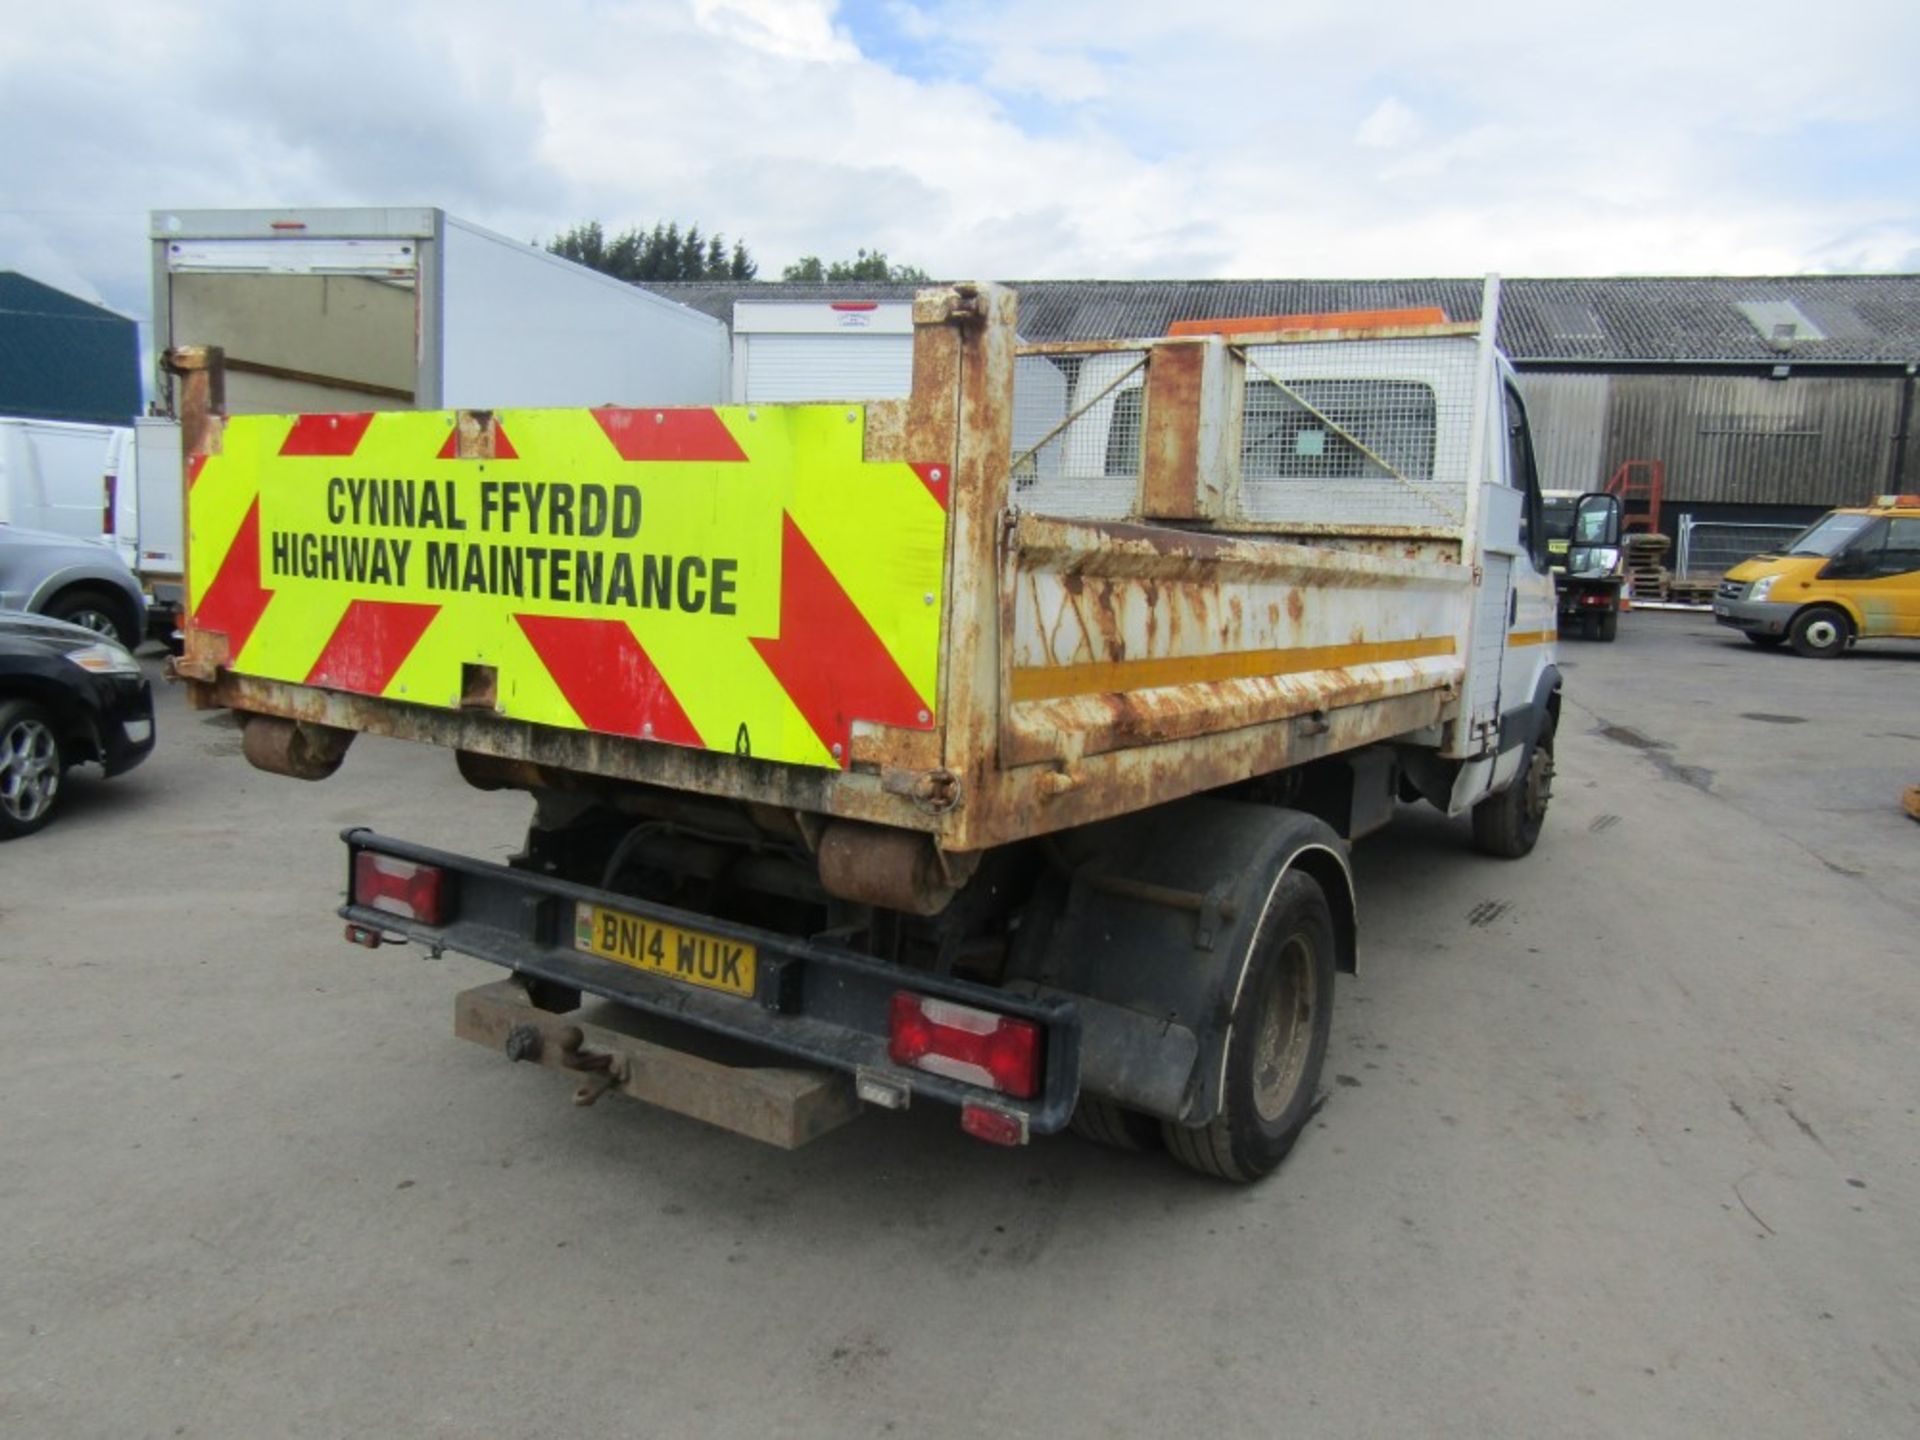 14 reg IVECO DAILY 70C17 TIPPER (DIRECT COUNCIL) 1ST REG 03/14, TEST 02/23, 163291KM, V5 HERE, 1 - Image 4 of 6